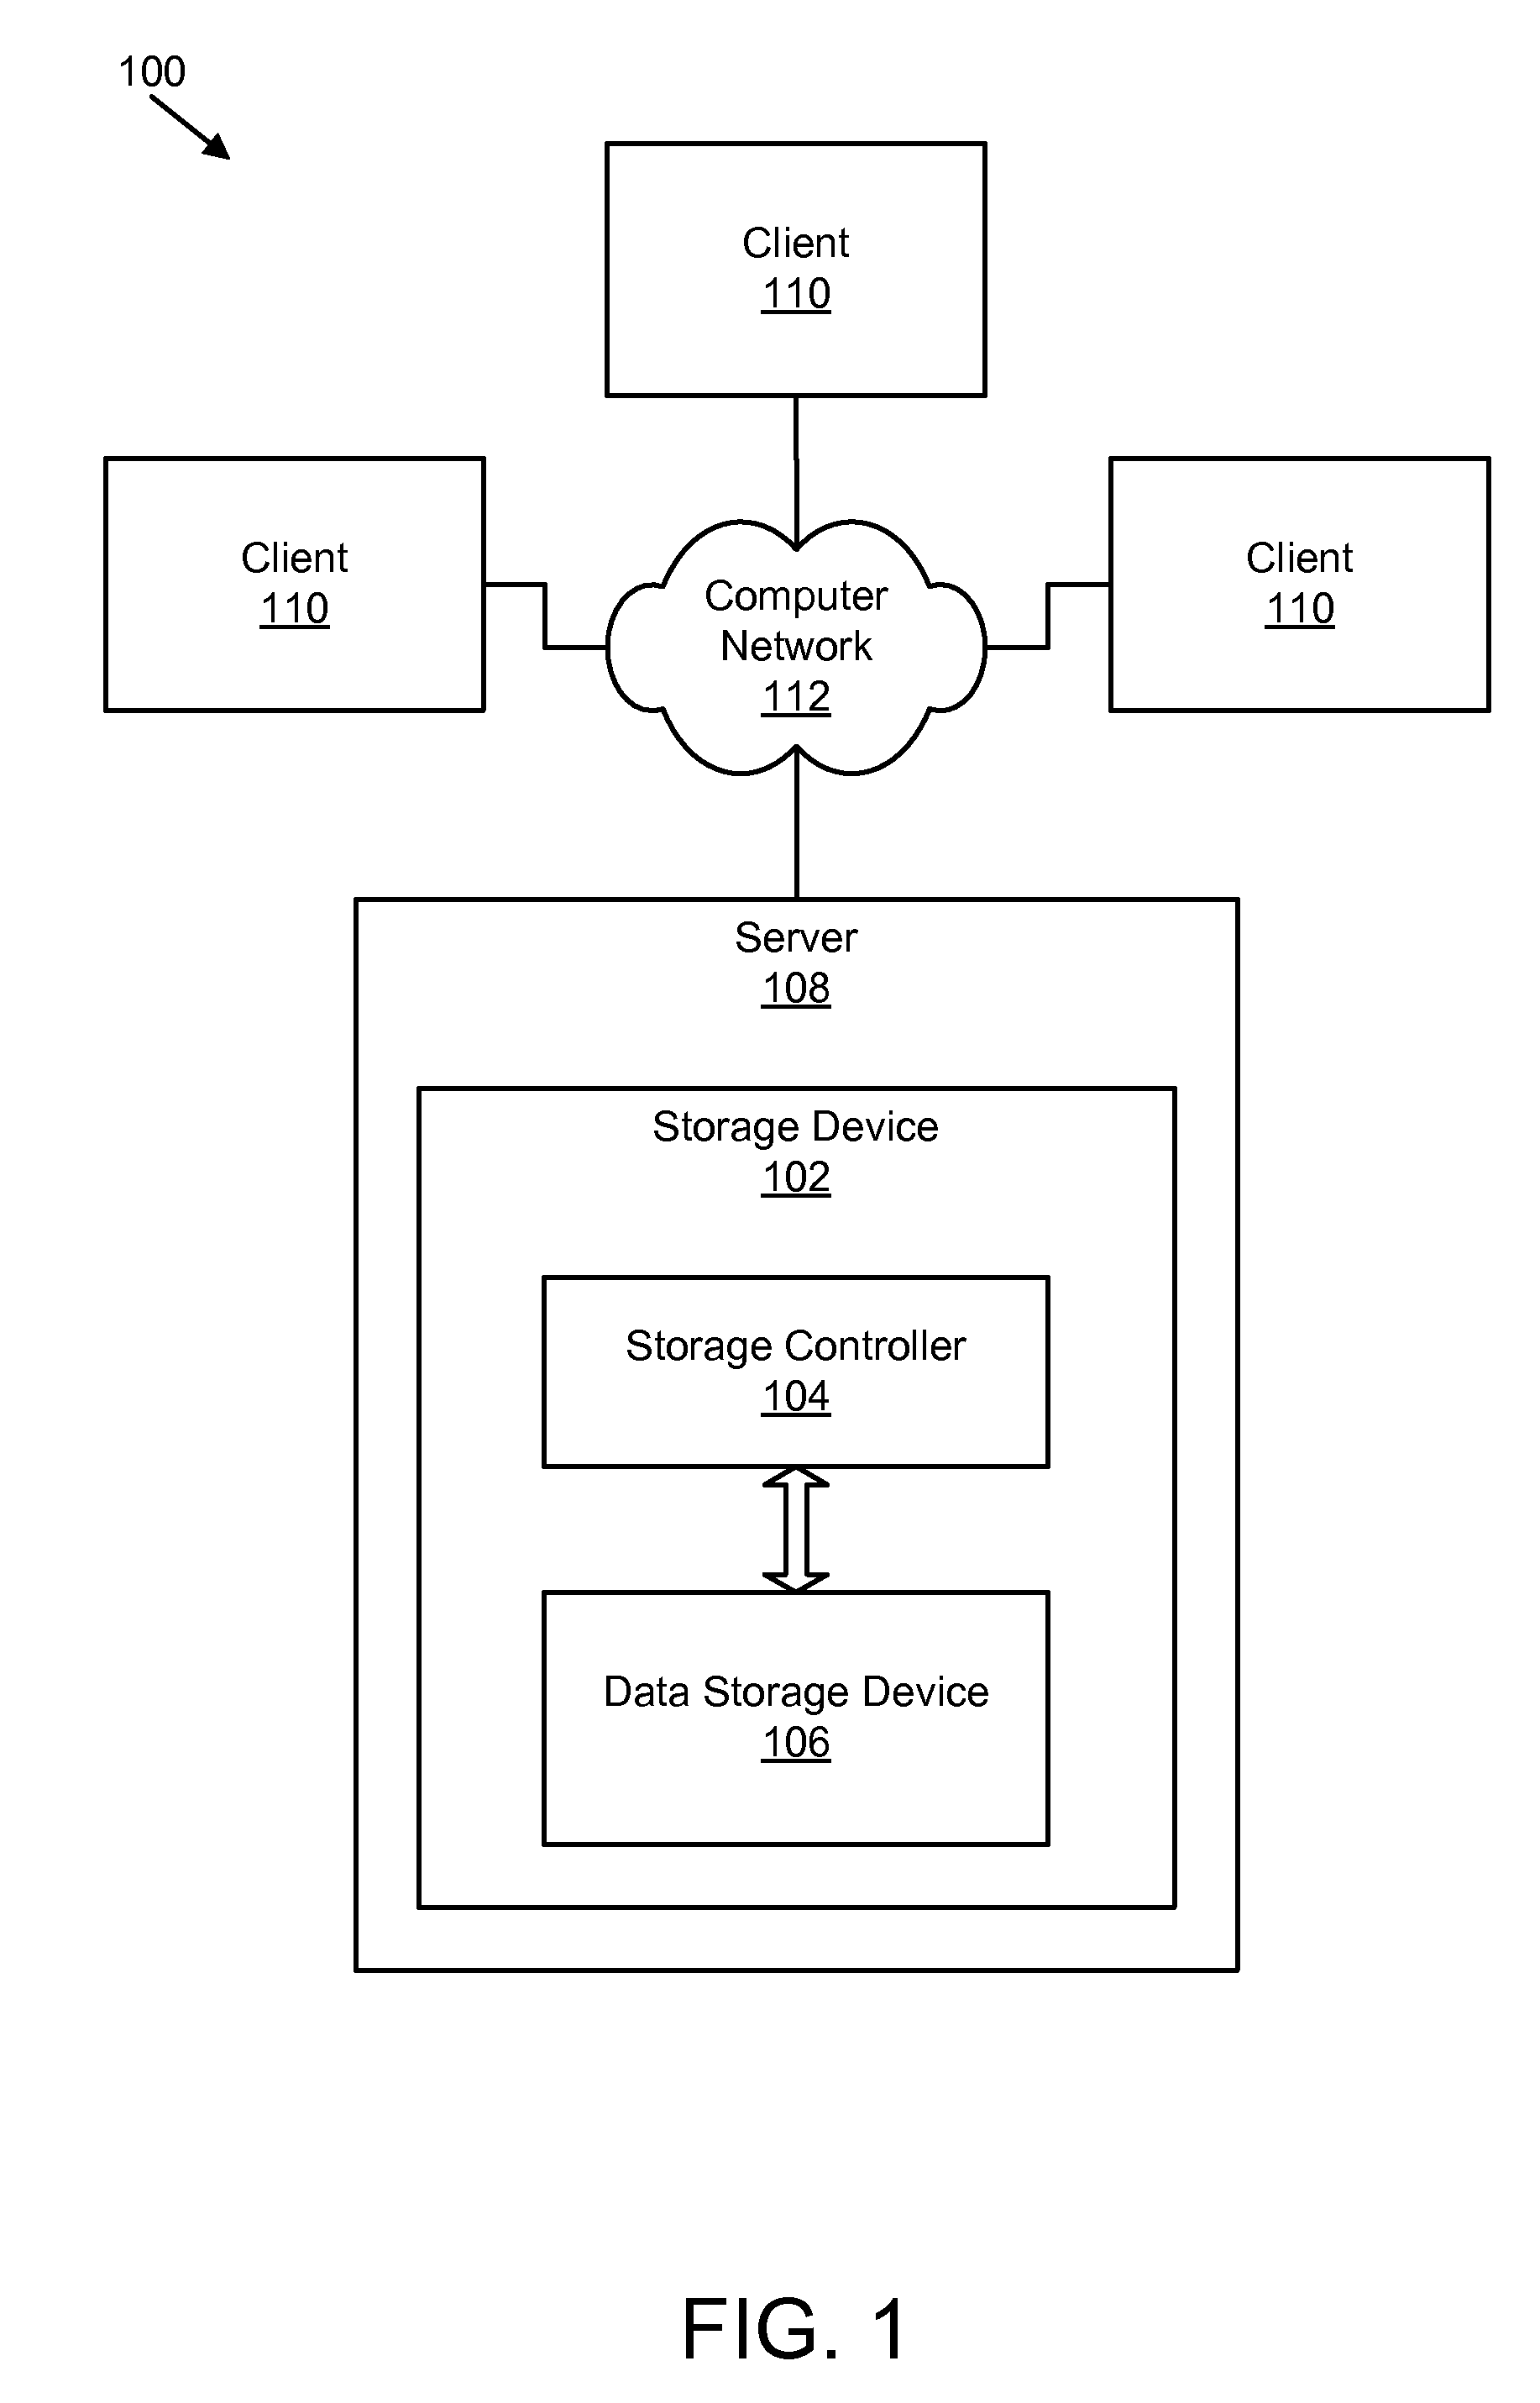 Apparatus, system, and method for validating that a correct data segment is read from a data storage device